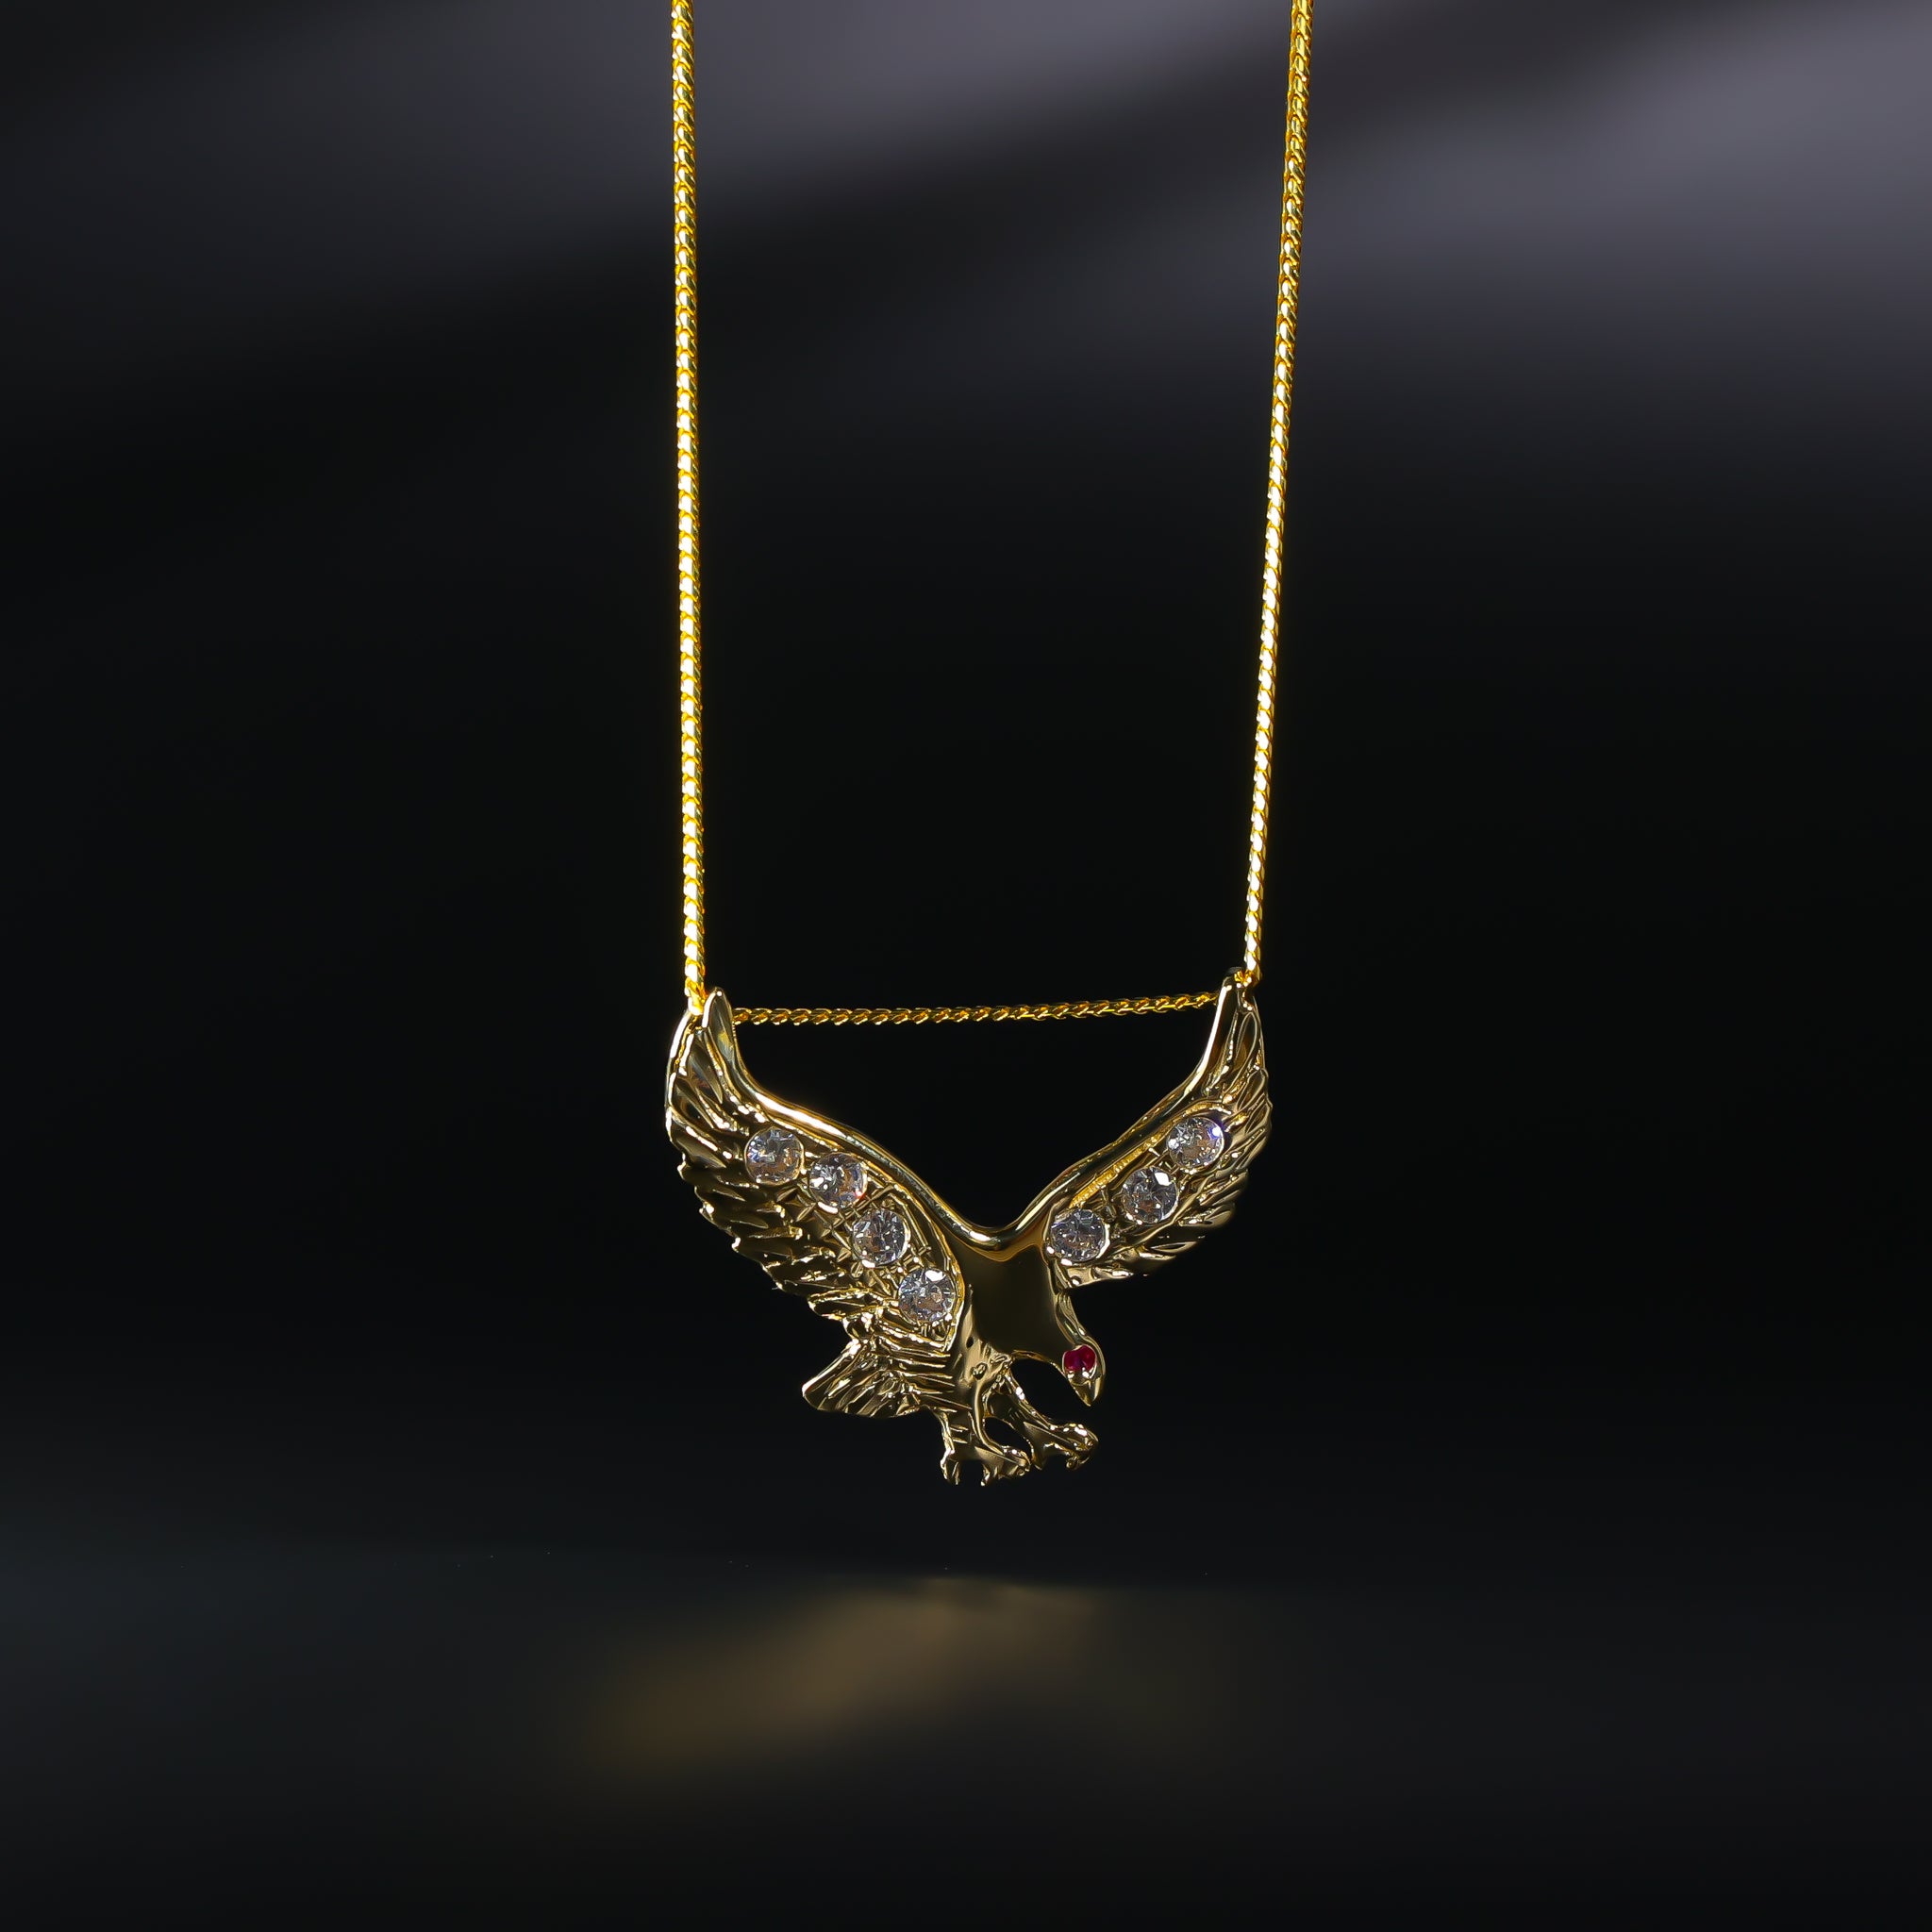 Gold Eagle Pendant Model-1599 - Charlie & Co. Jewelry